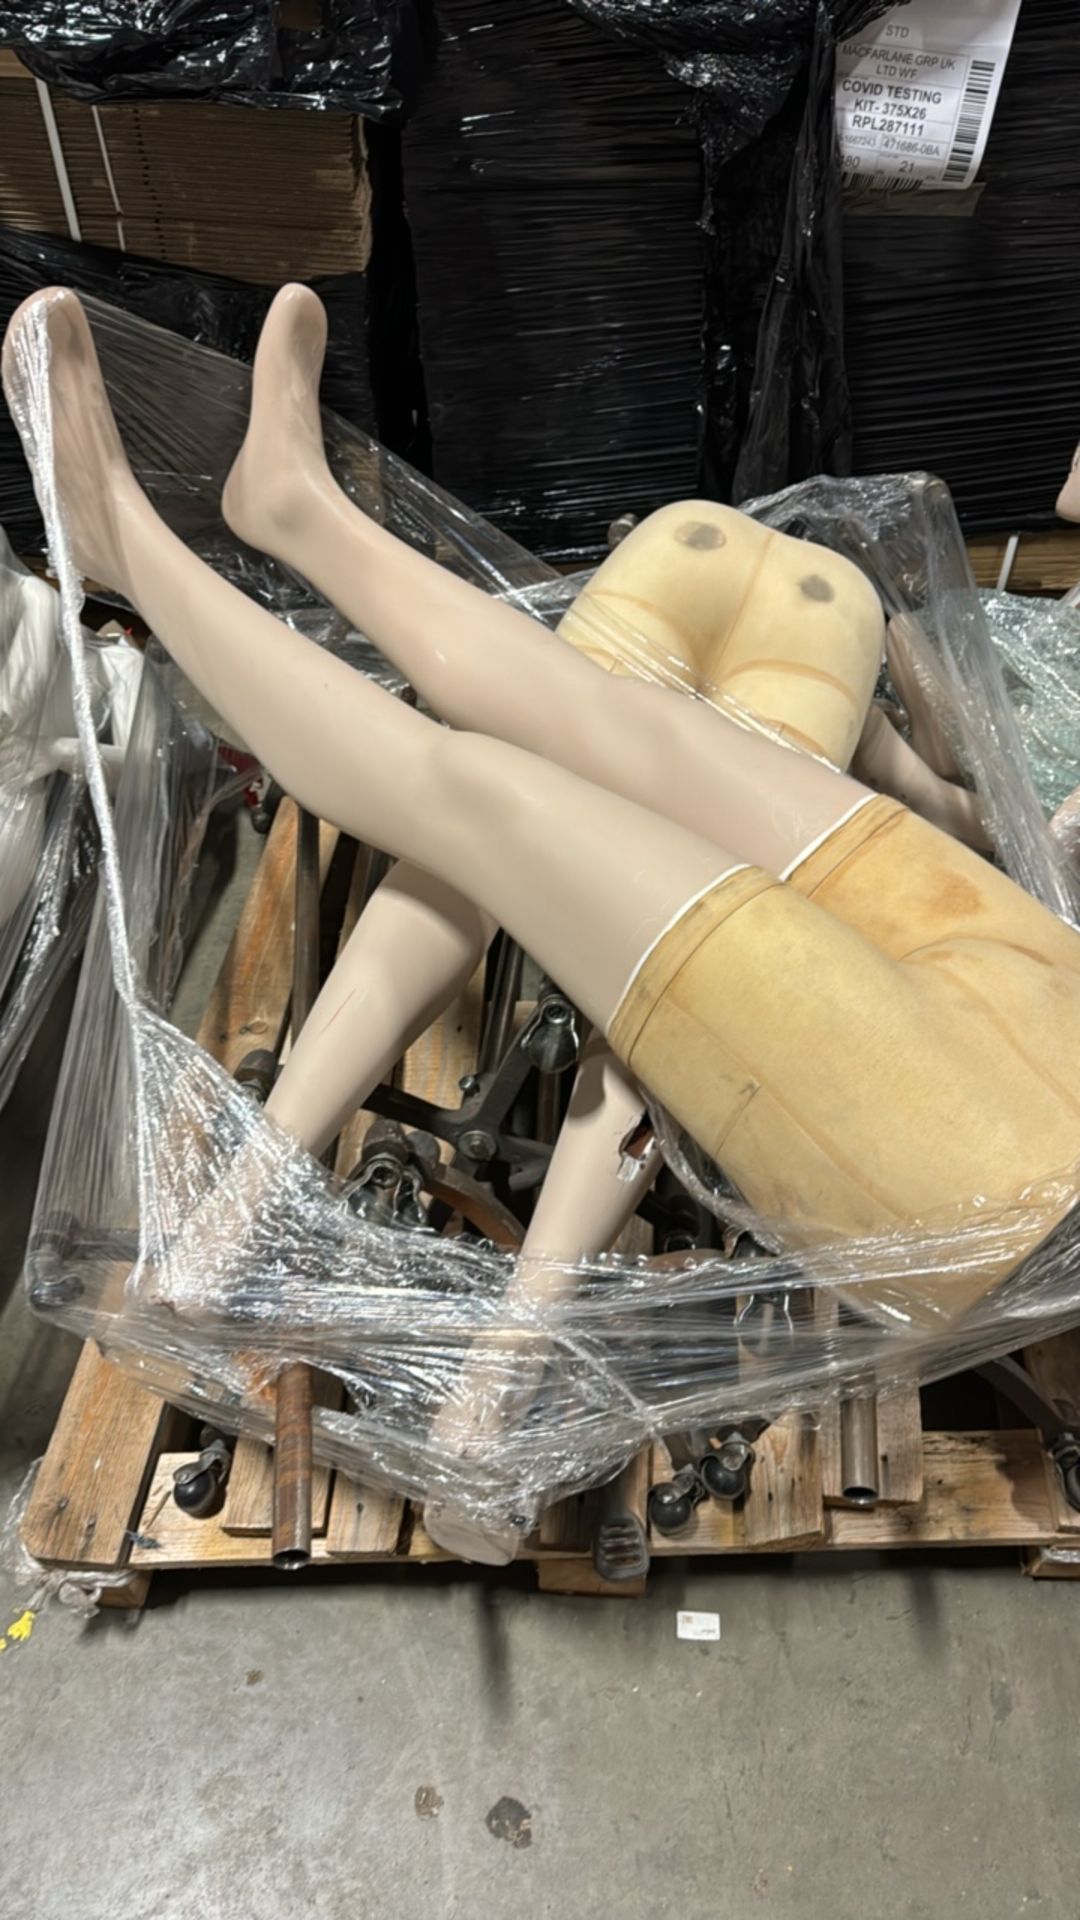 Pallet Of Mixed Manequin Busts